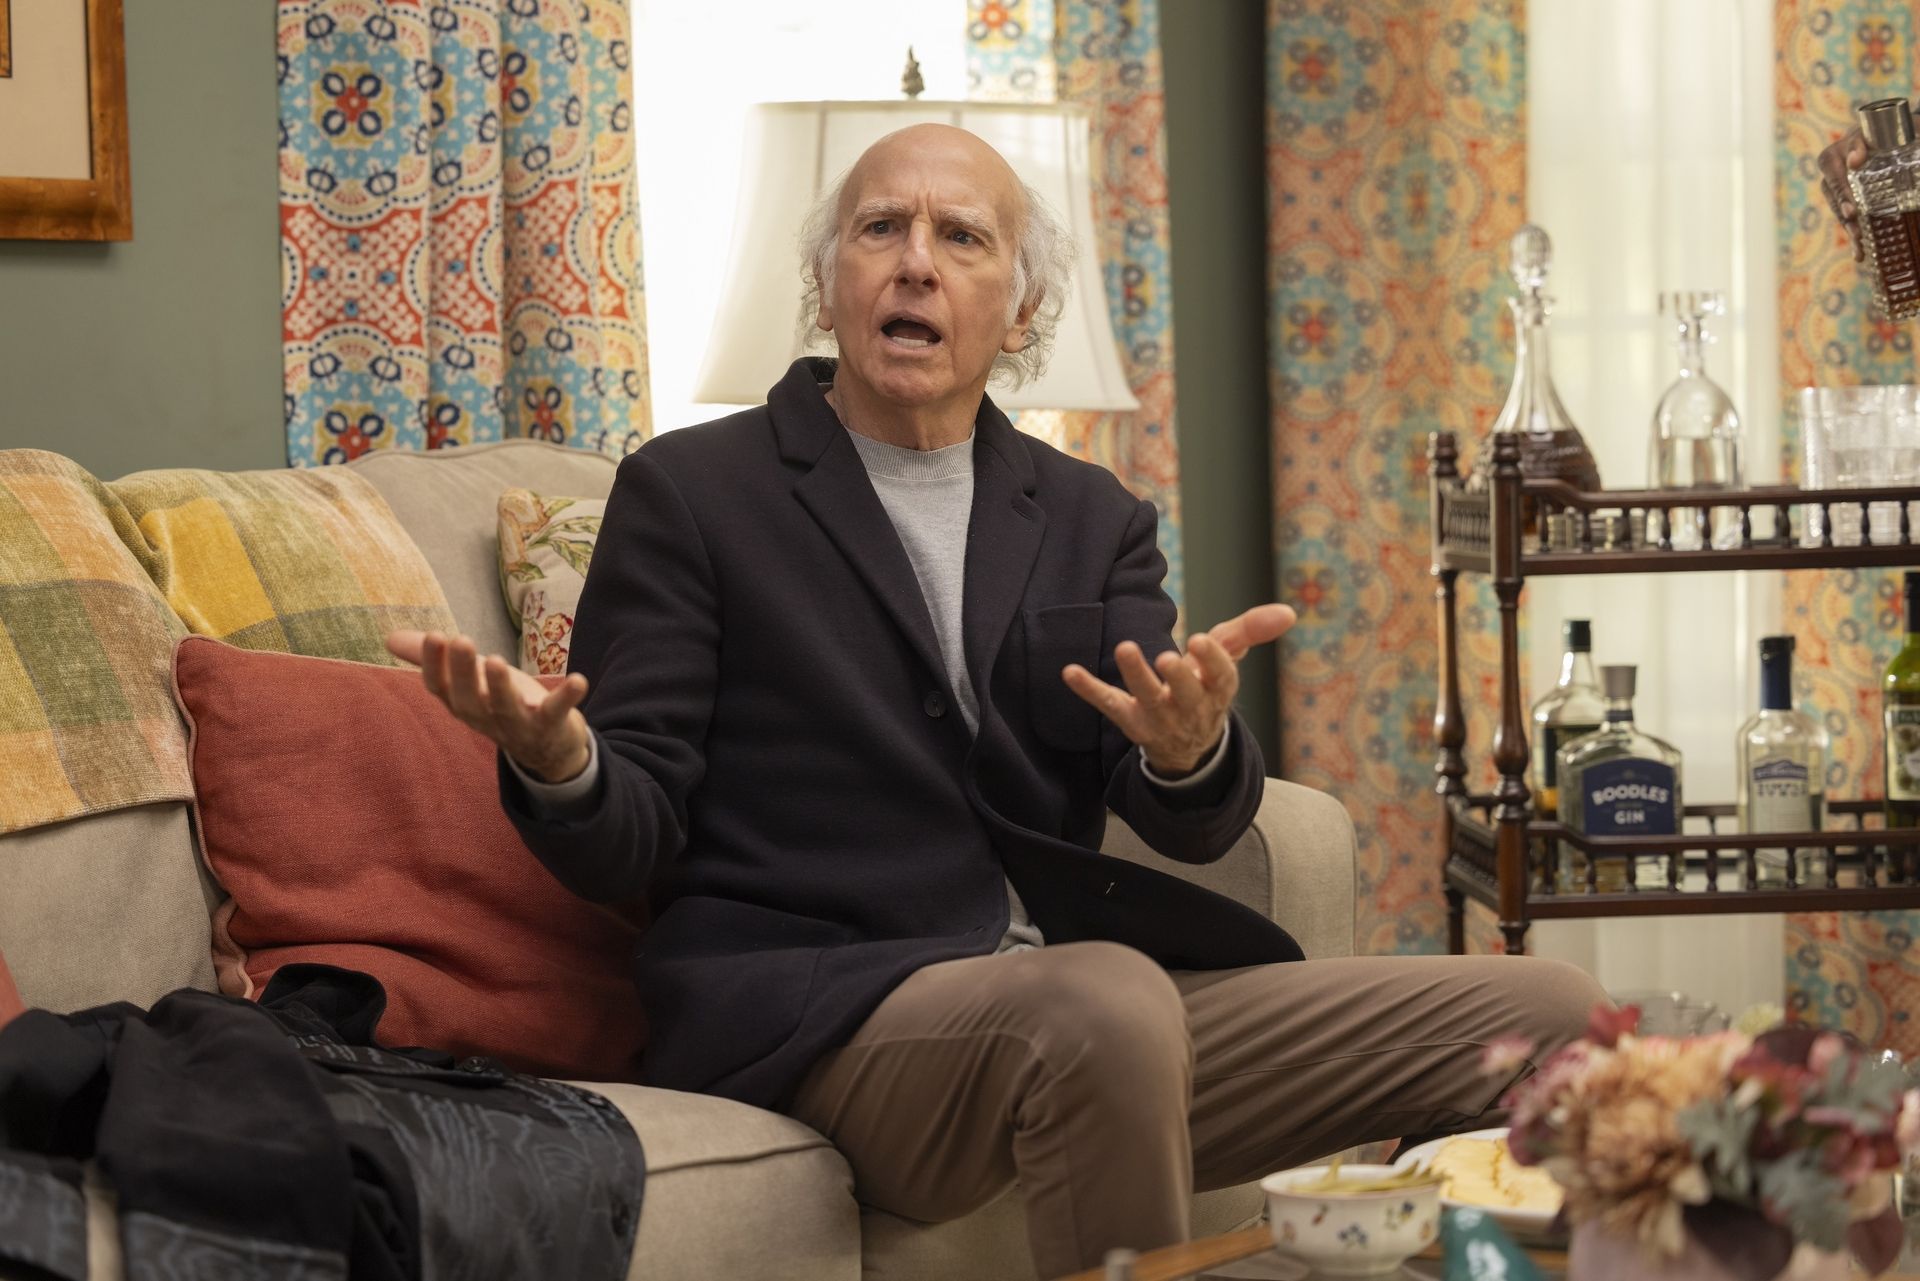 How to Watch 'Curb Your Enthusiasm' Season 12 Online: Stream for Free